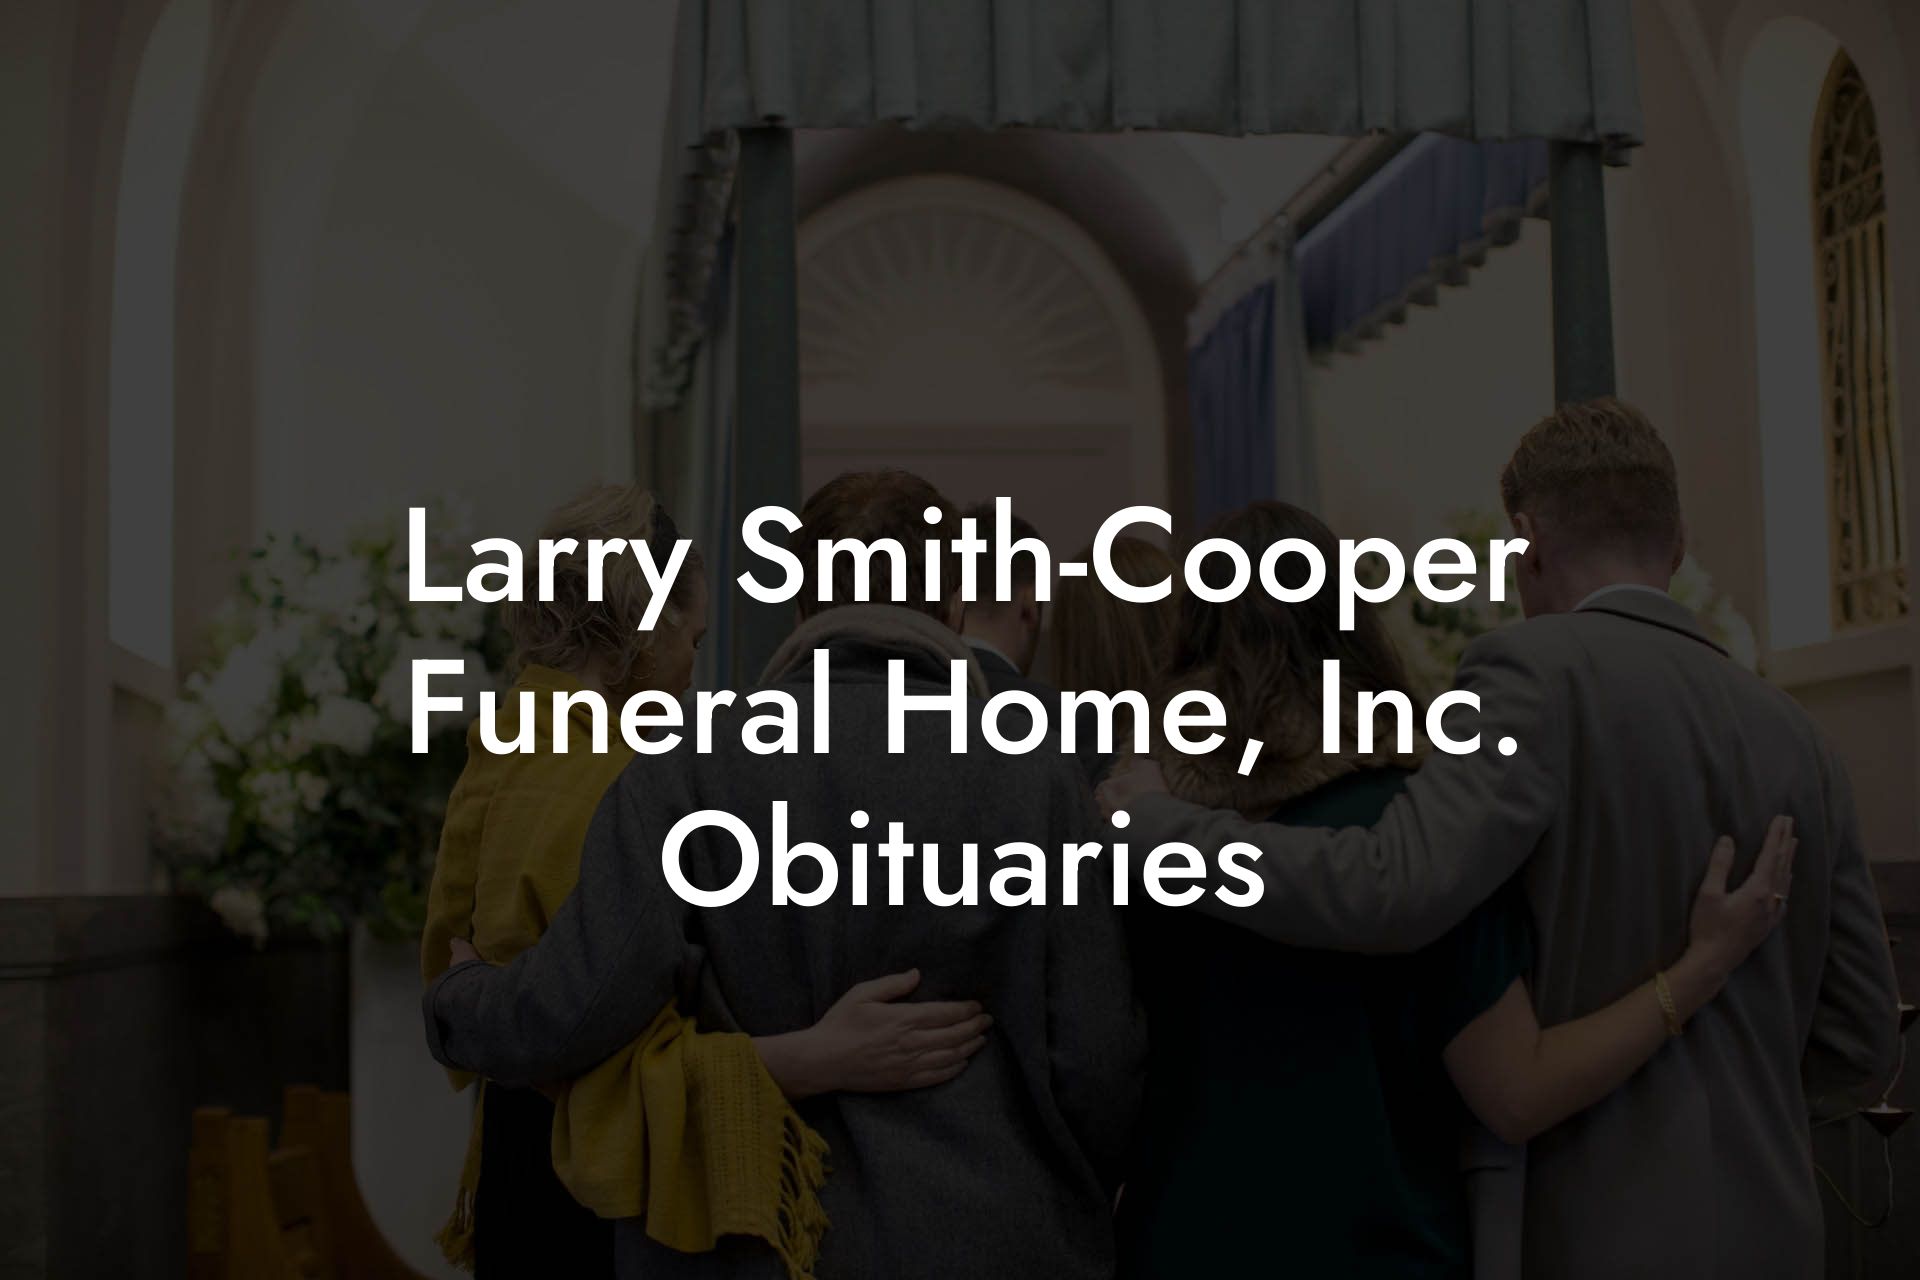 Larry Smith-Cooper Funeral Home, Inc. Obituaries